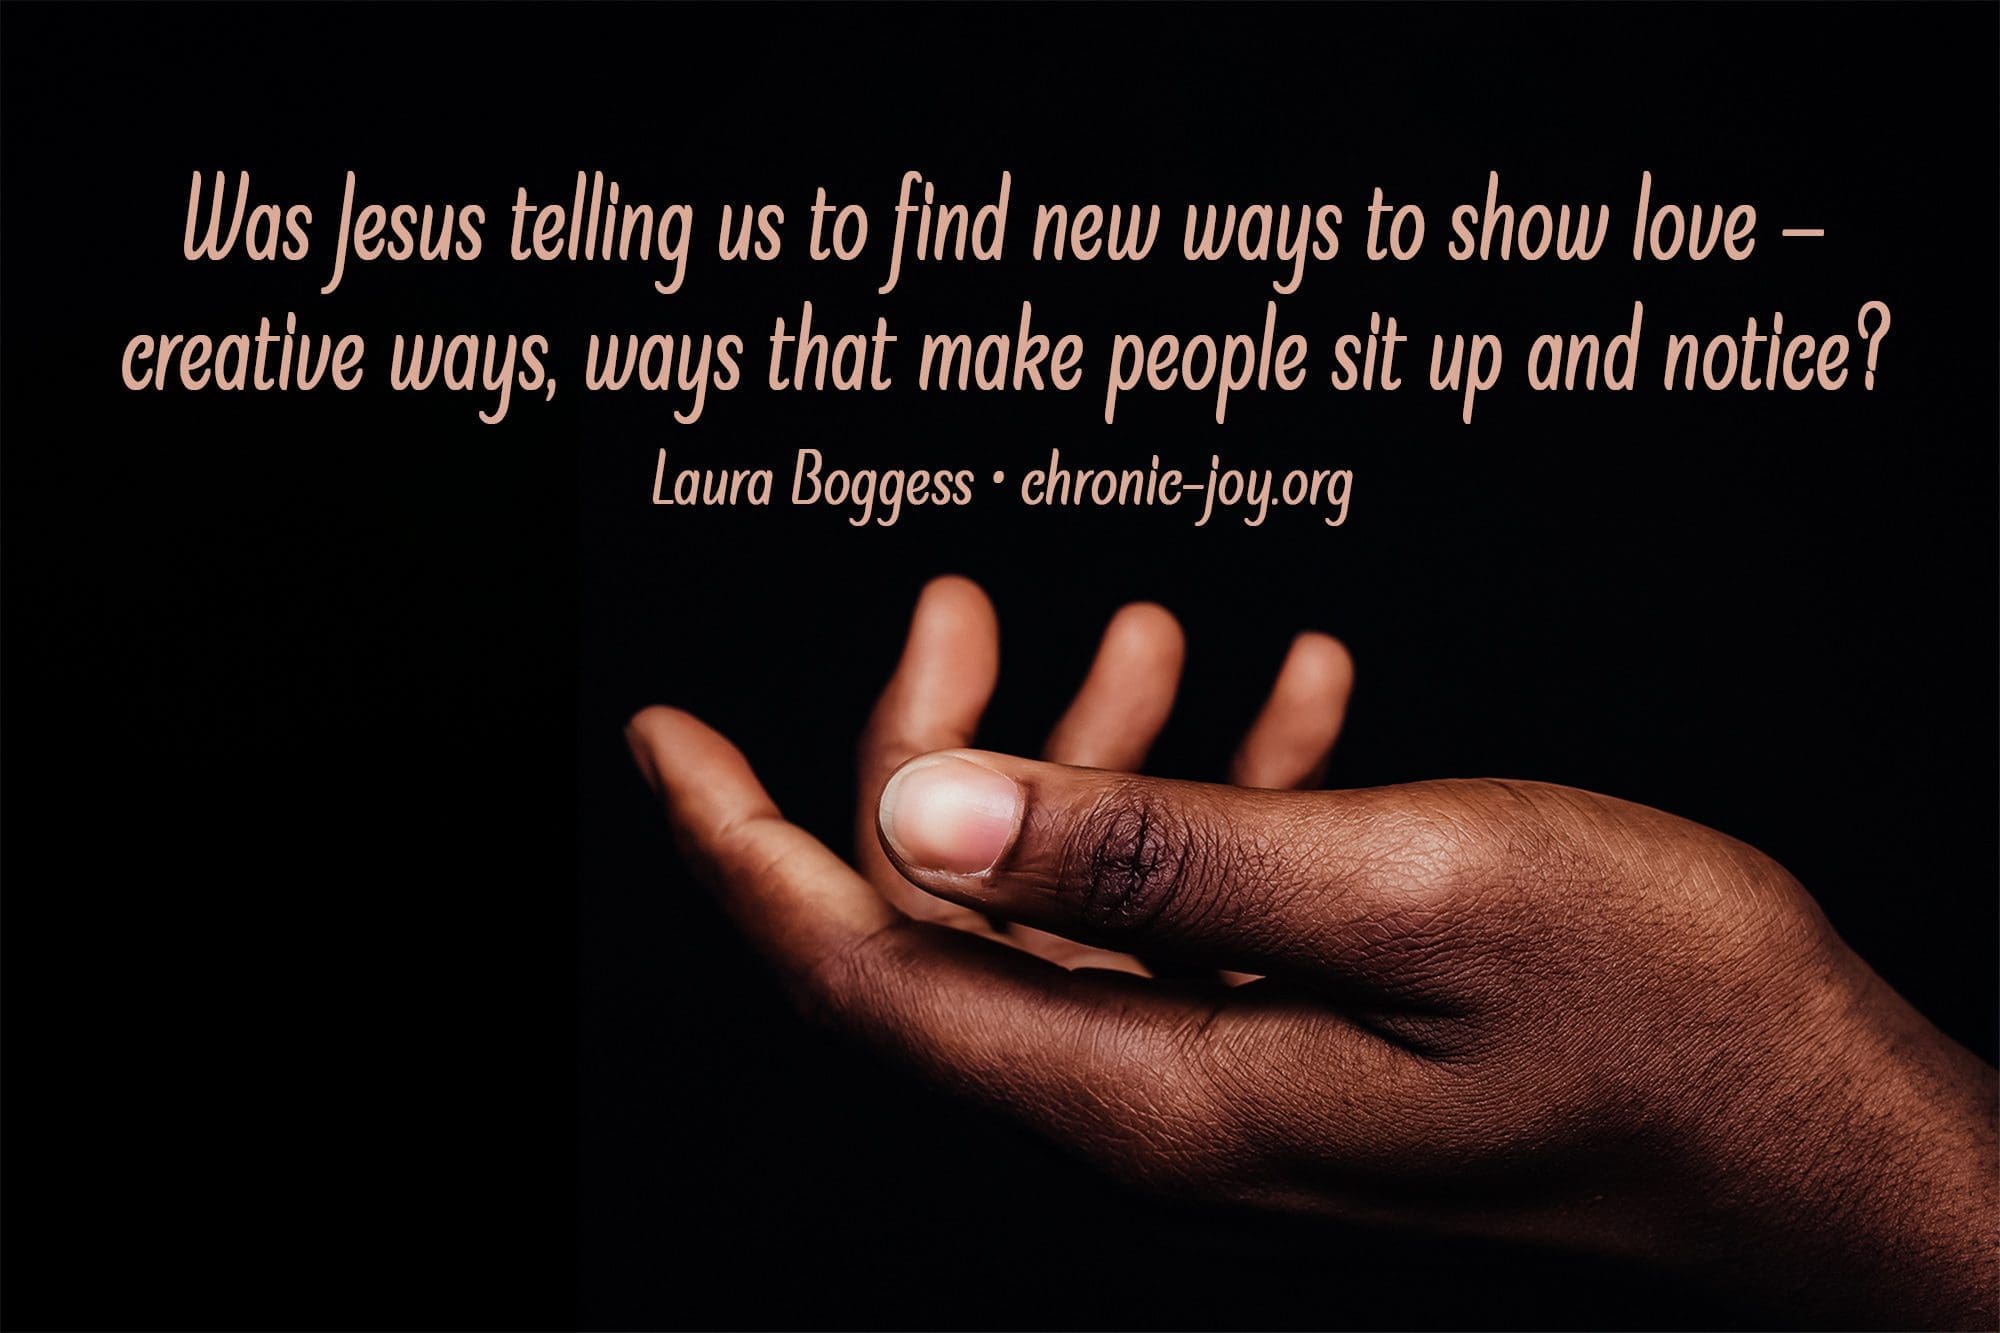 "Was Jesus telling us to find new ways to show love — creative ways, ways that make people sit up and notice?" Laura Boggess